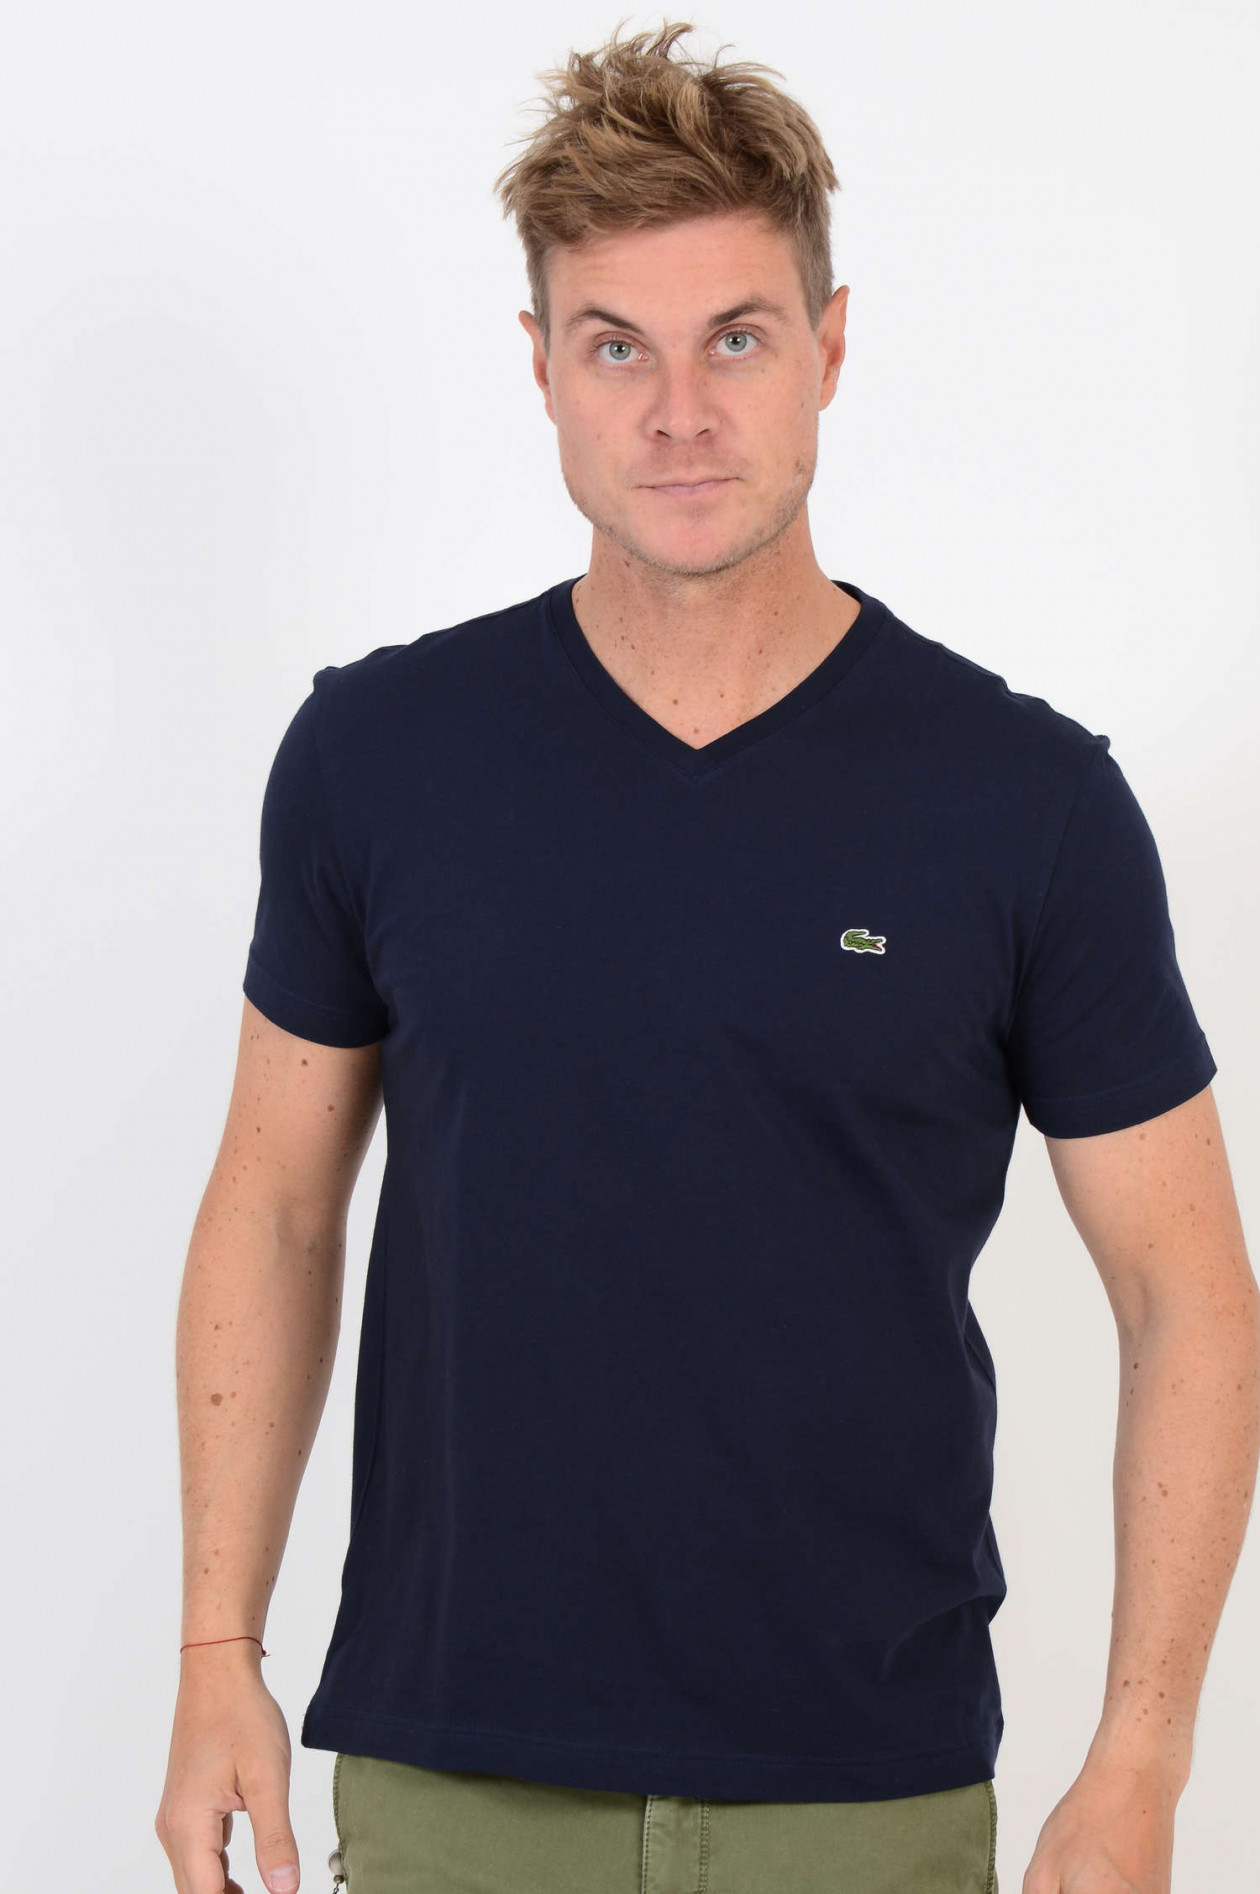 T-Shirt Lacoste in Navy